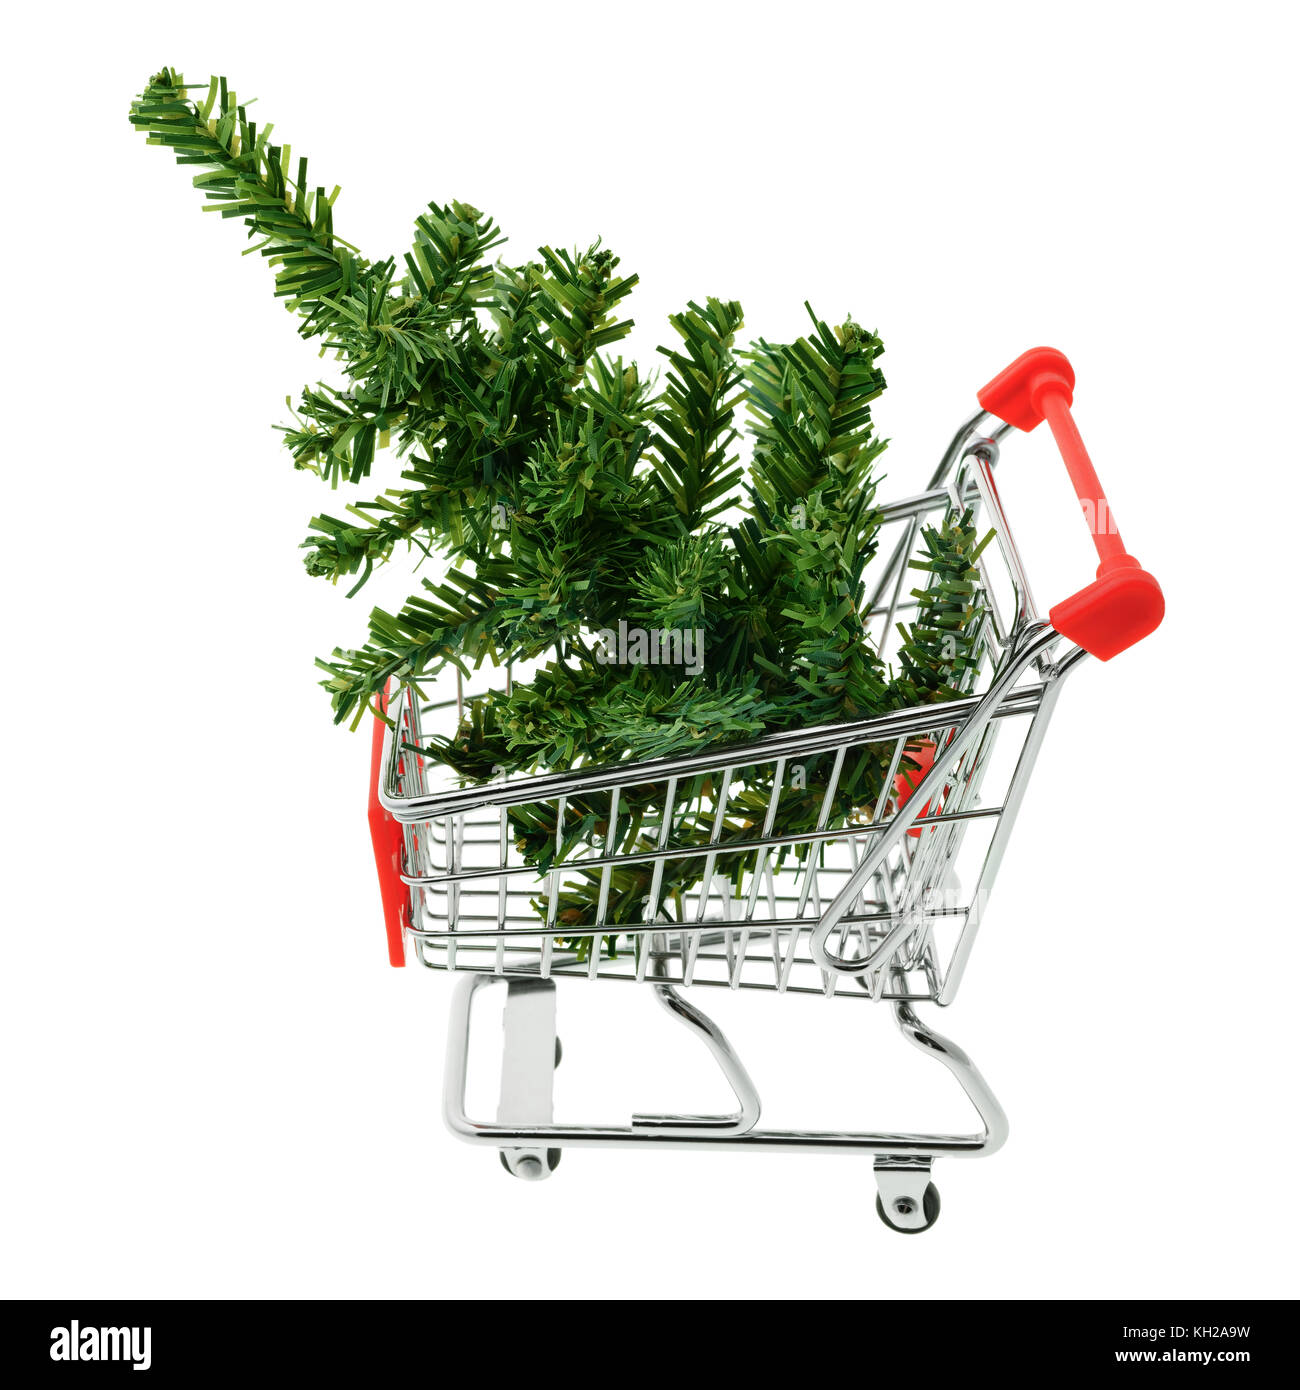 Isolated objects: toy Christmas tree in a shopping cart, on white background, seasonal shopping concept Stock Photo